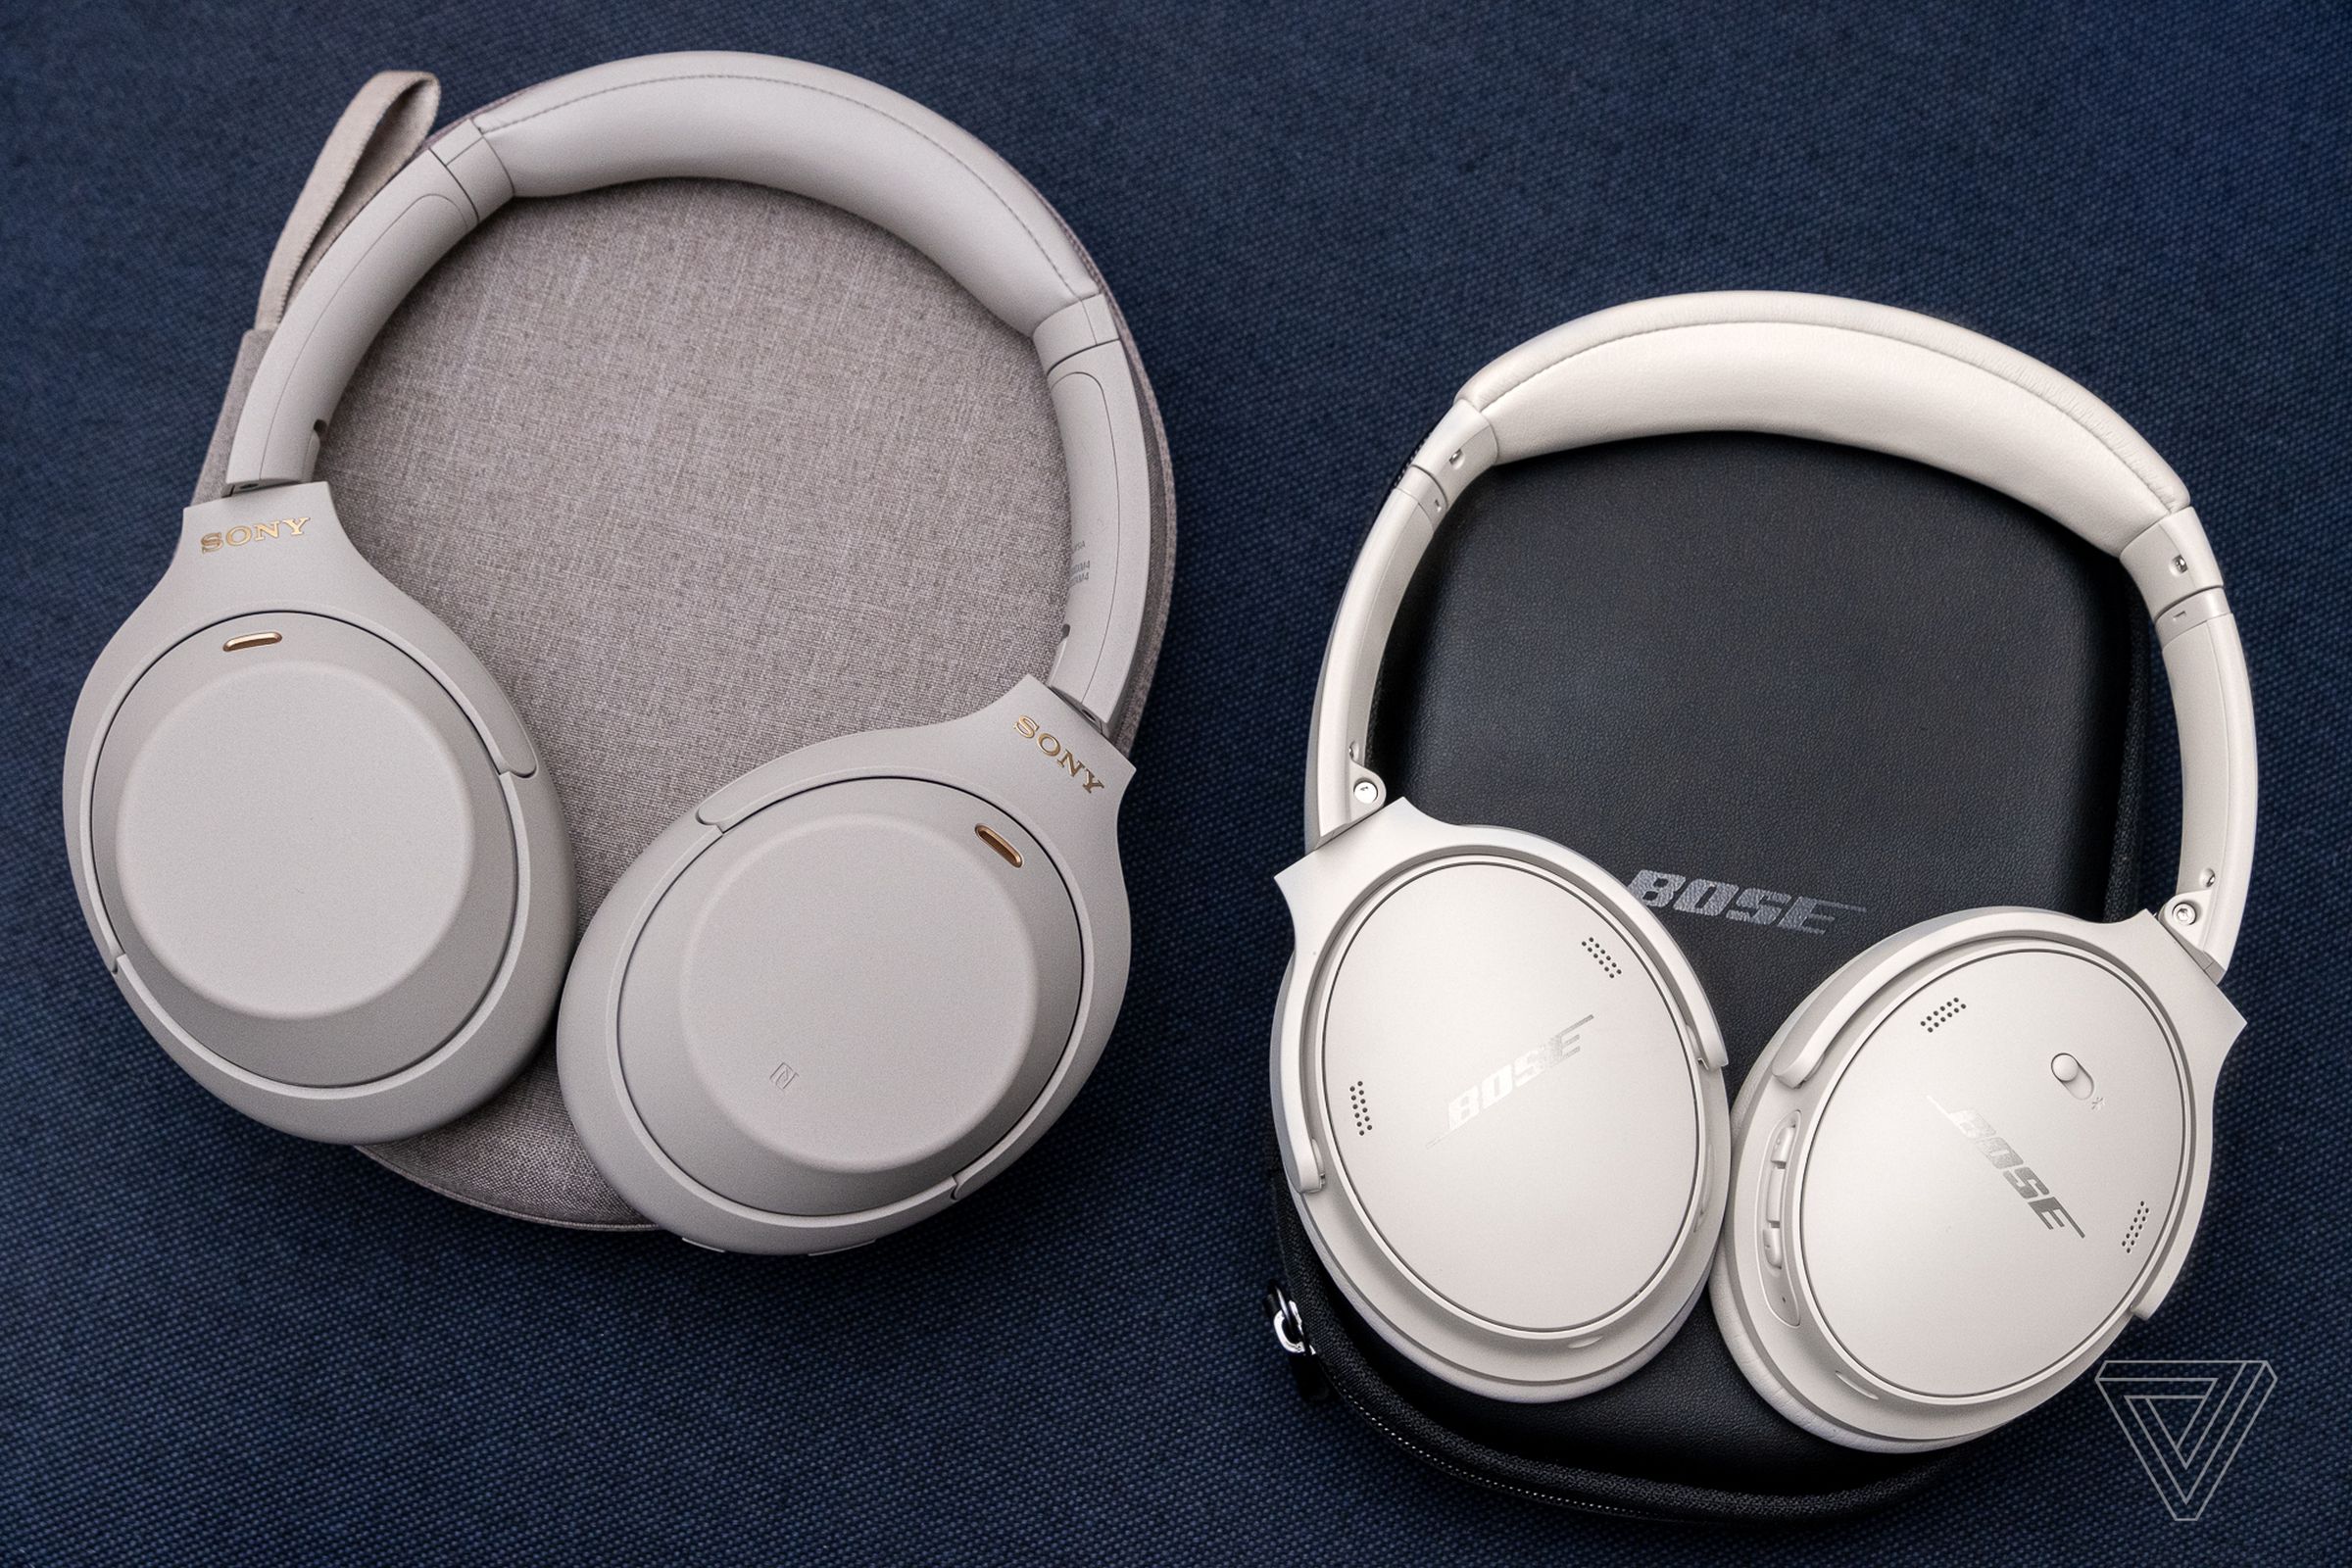 Sony’s WH-1000XM4 headphones at left, Bose’s QC45 at right.